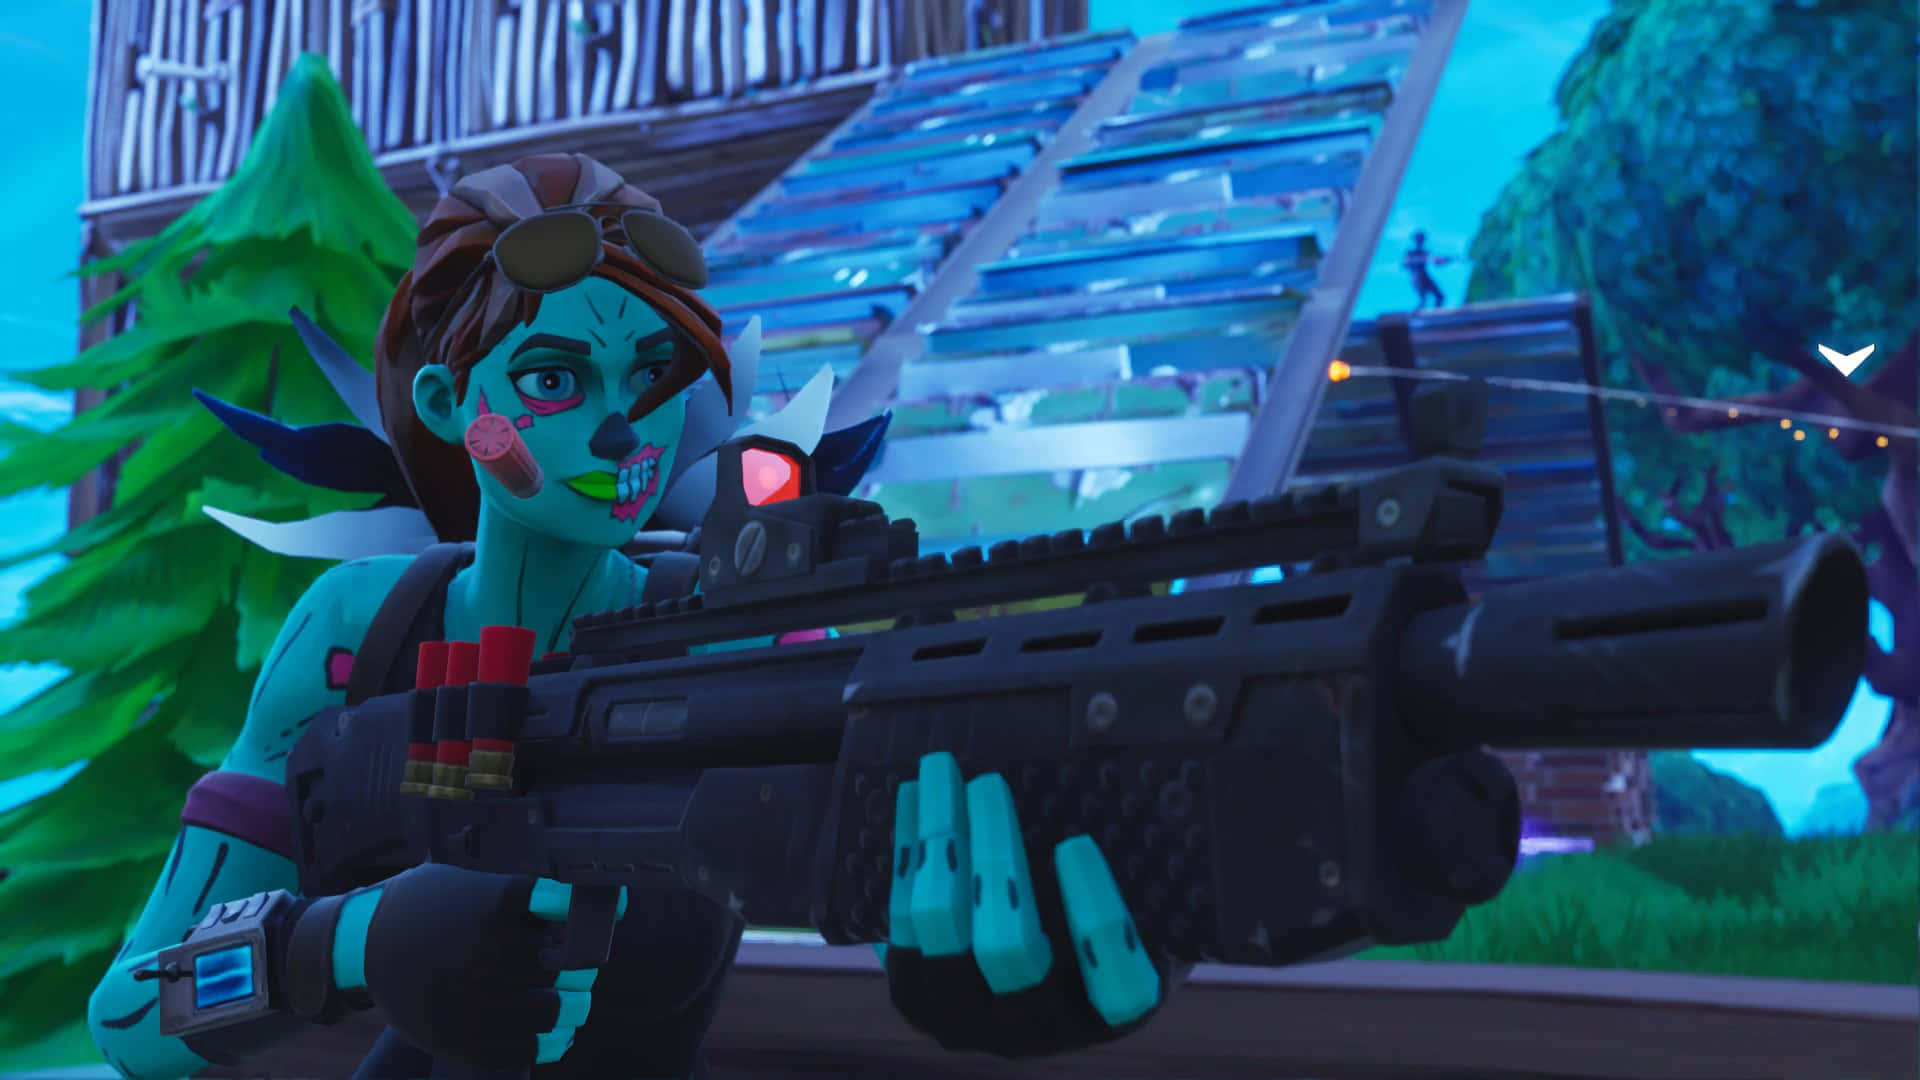 A Girl With A Gun In Fortnite Wallpaper